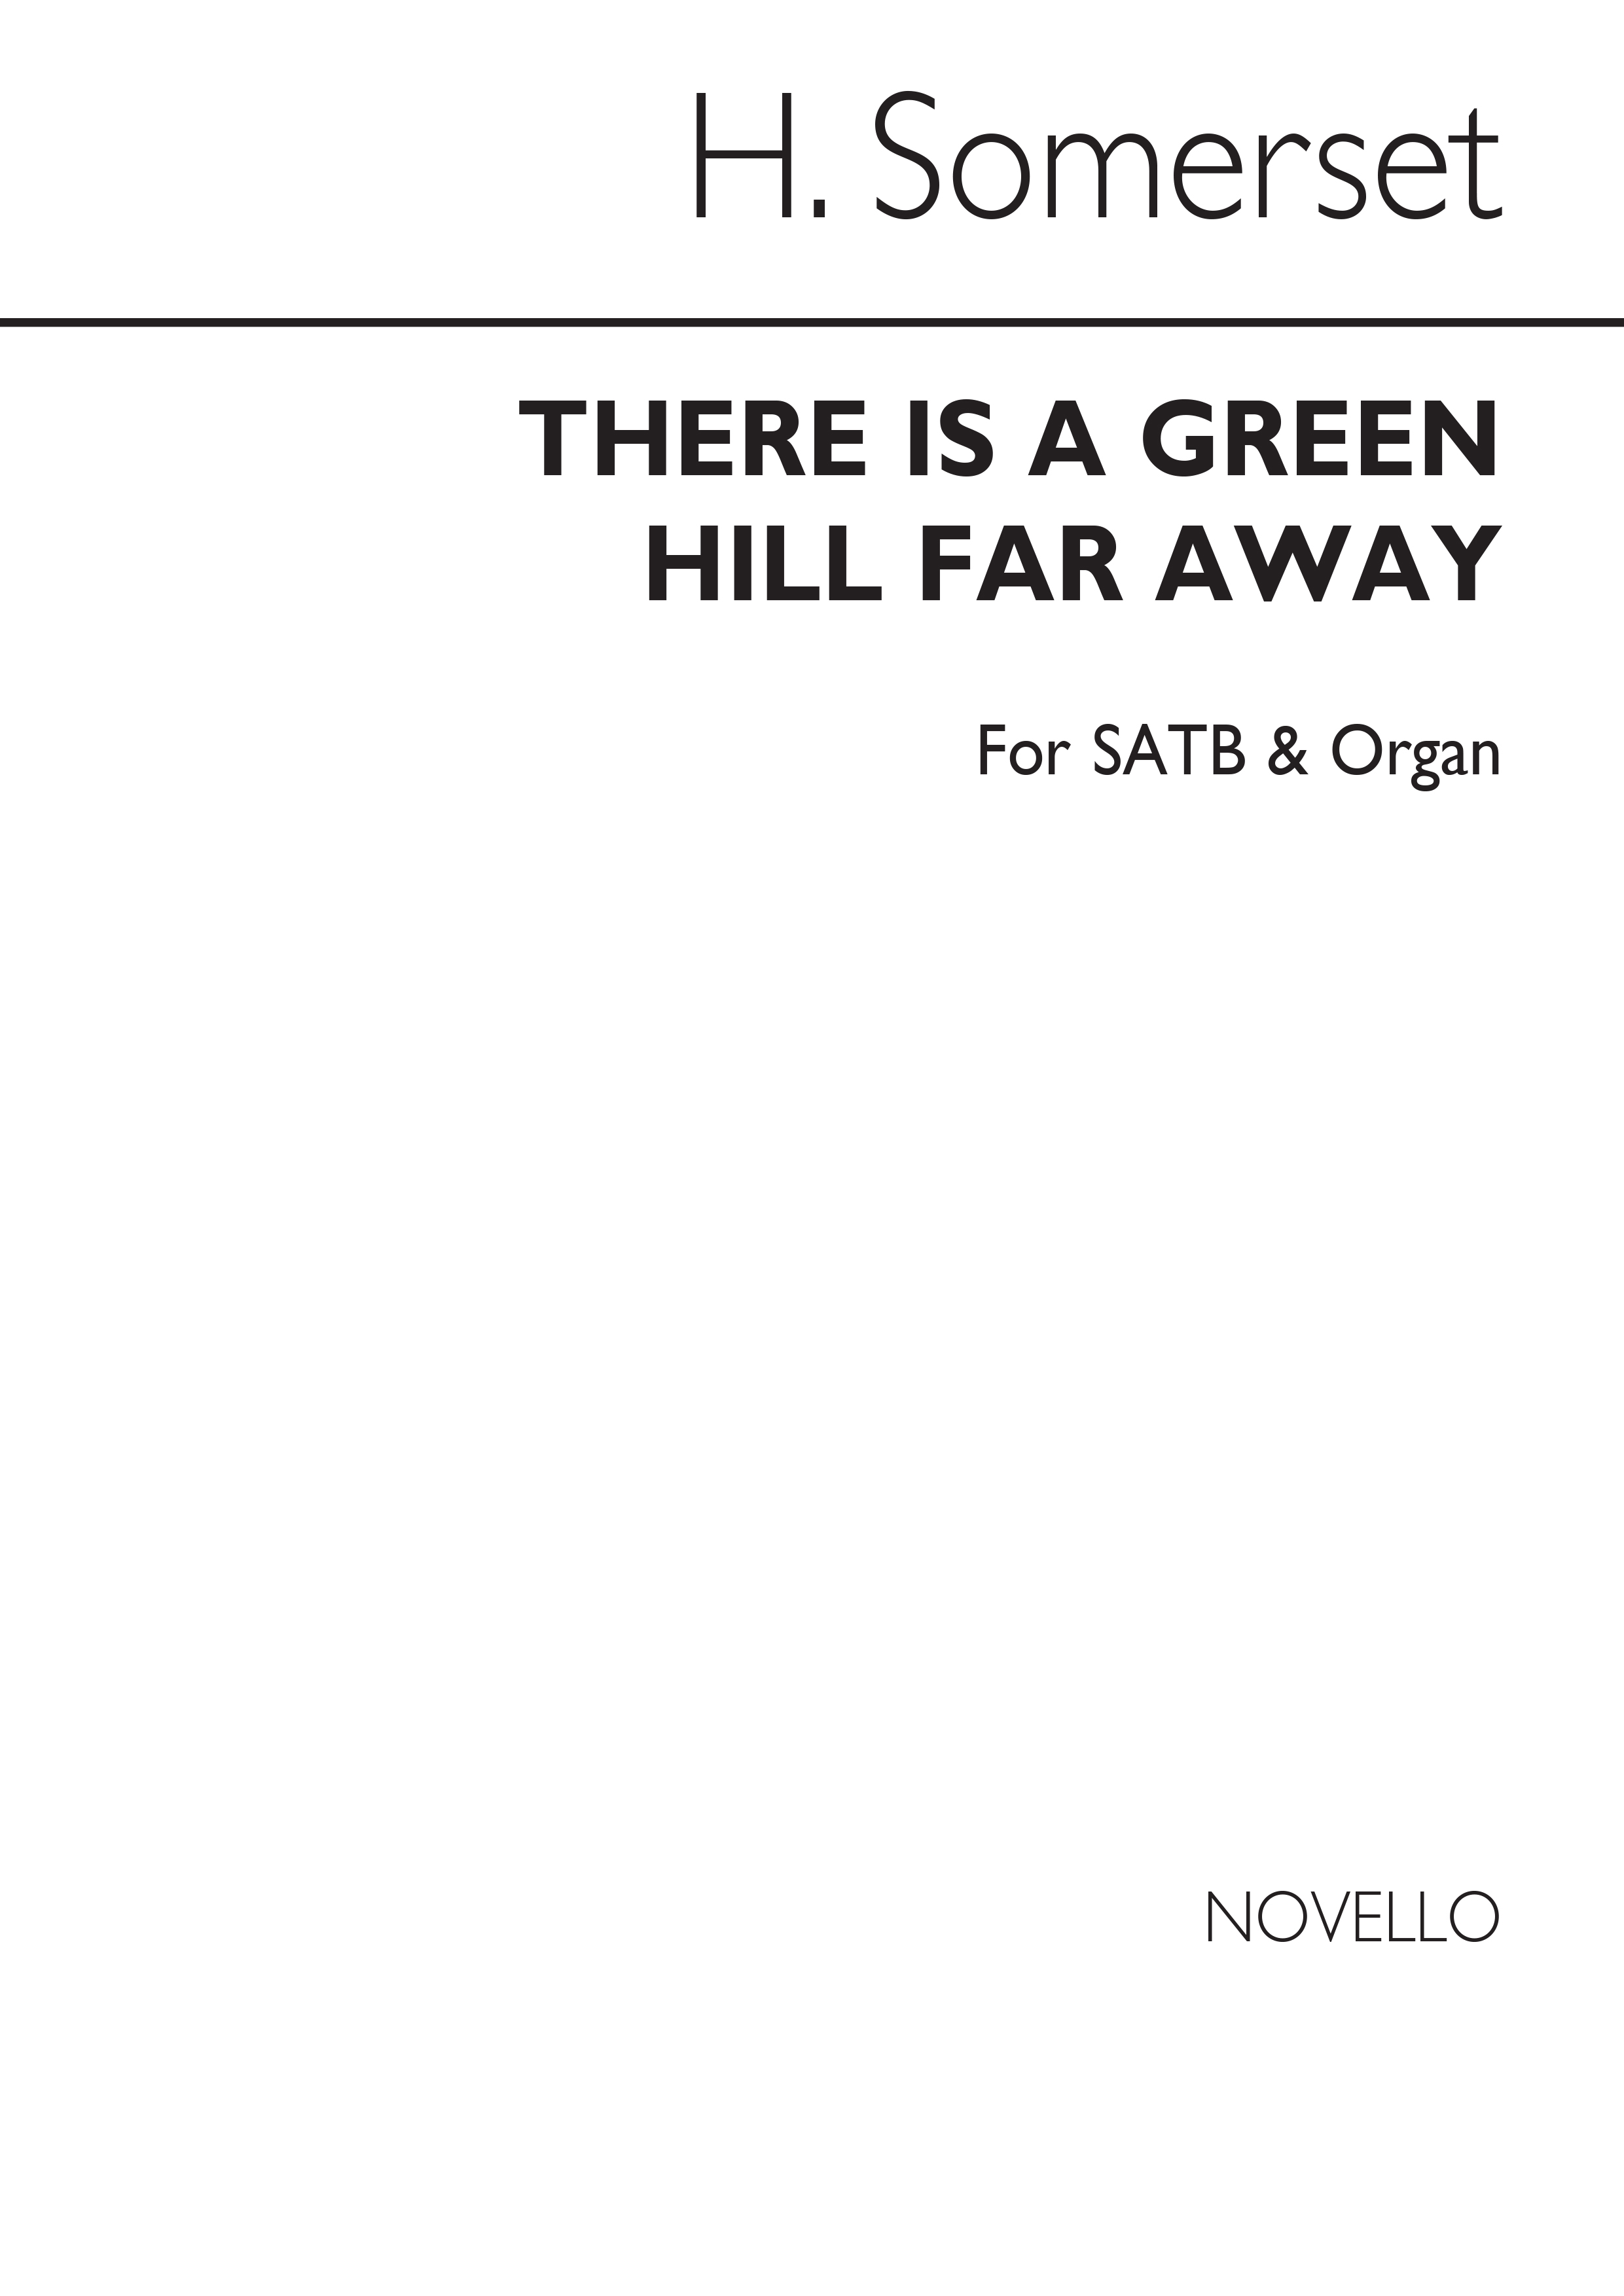 Lord Somerset There Is A Green Hill Far Away Satb/Organ